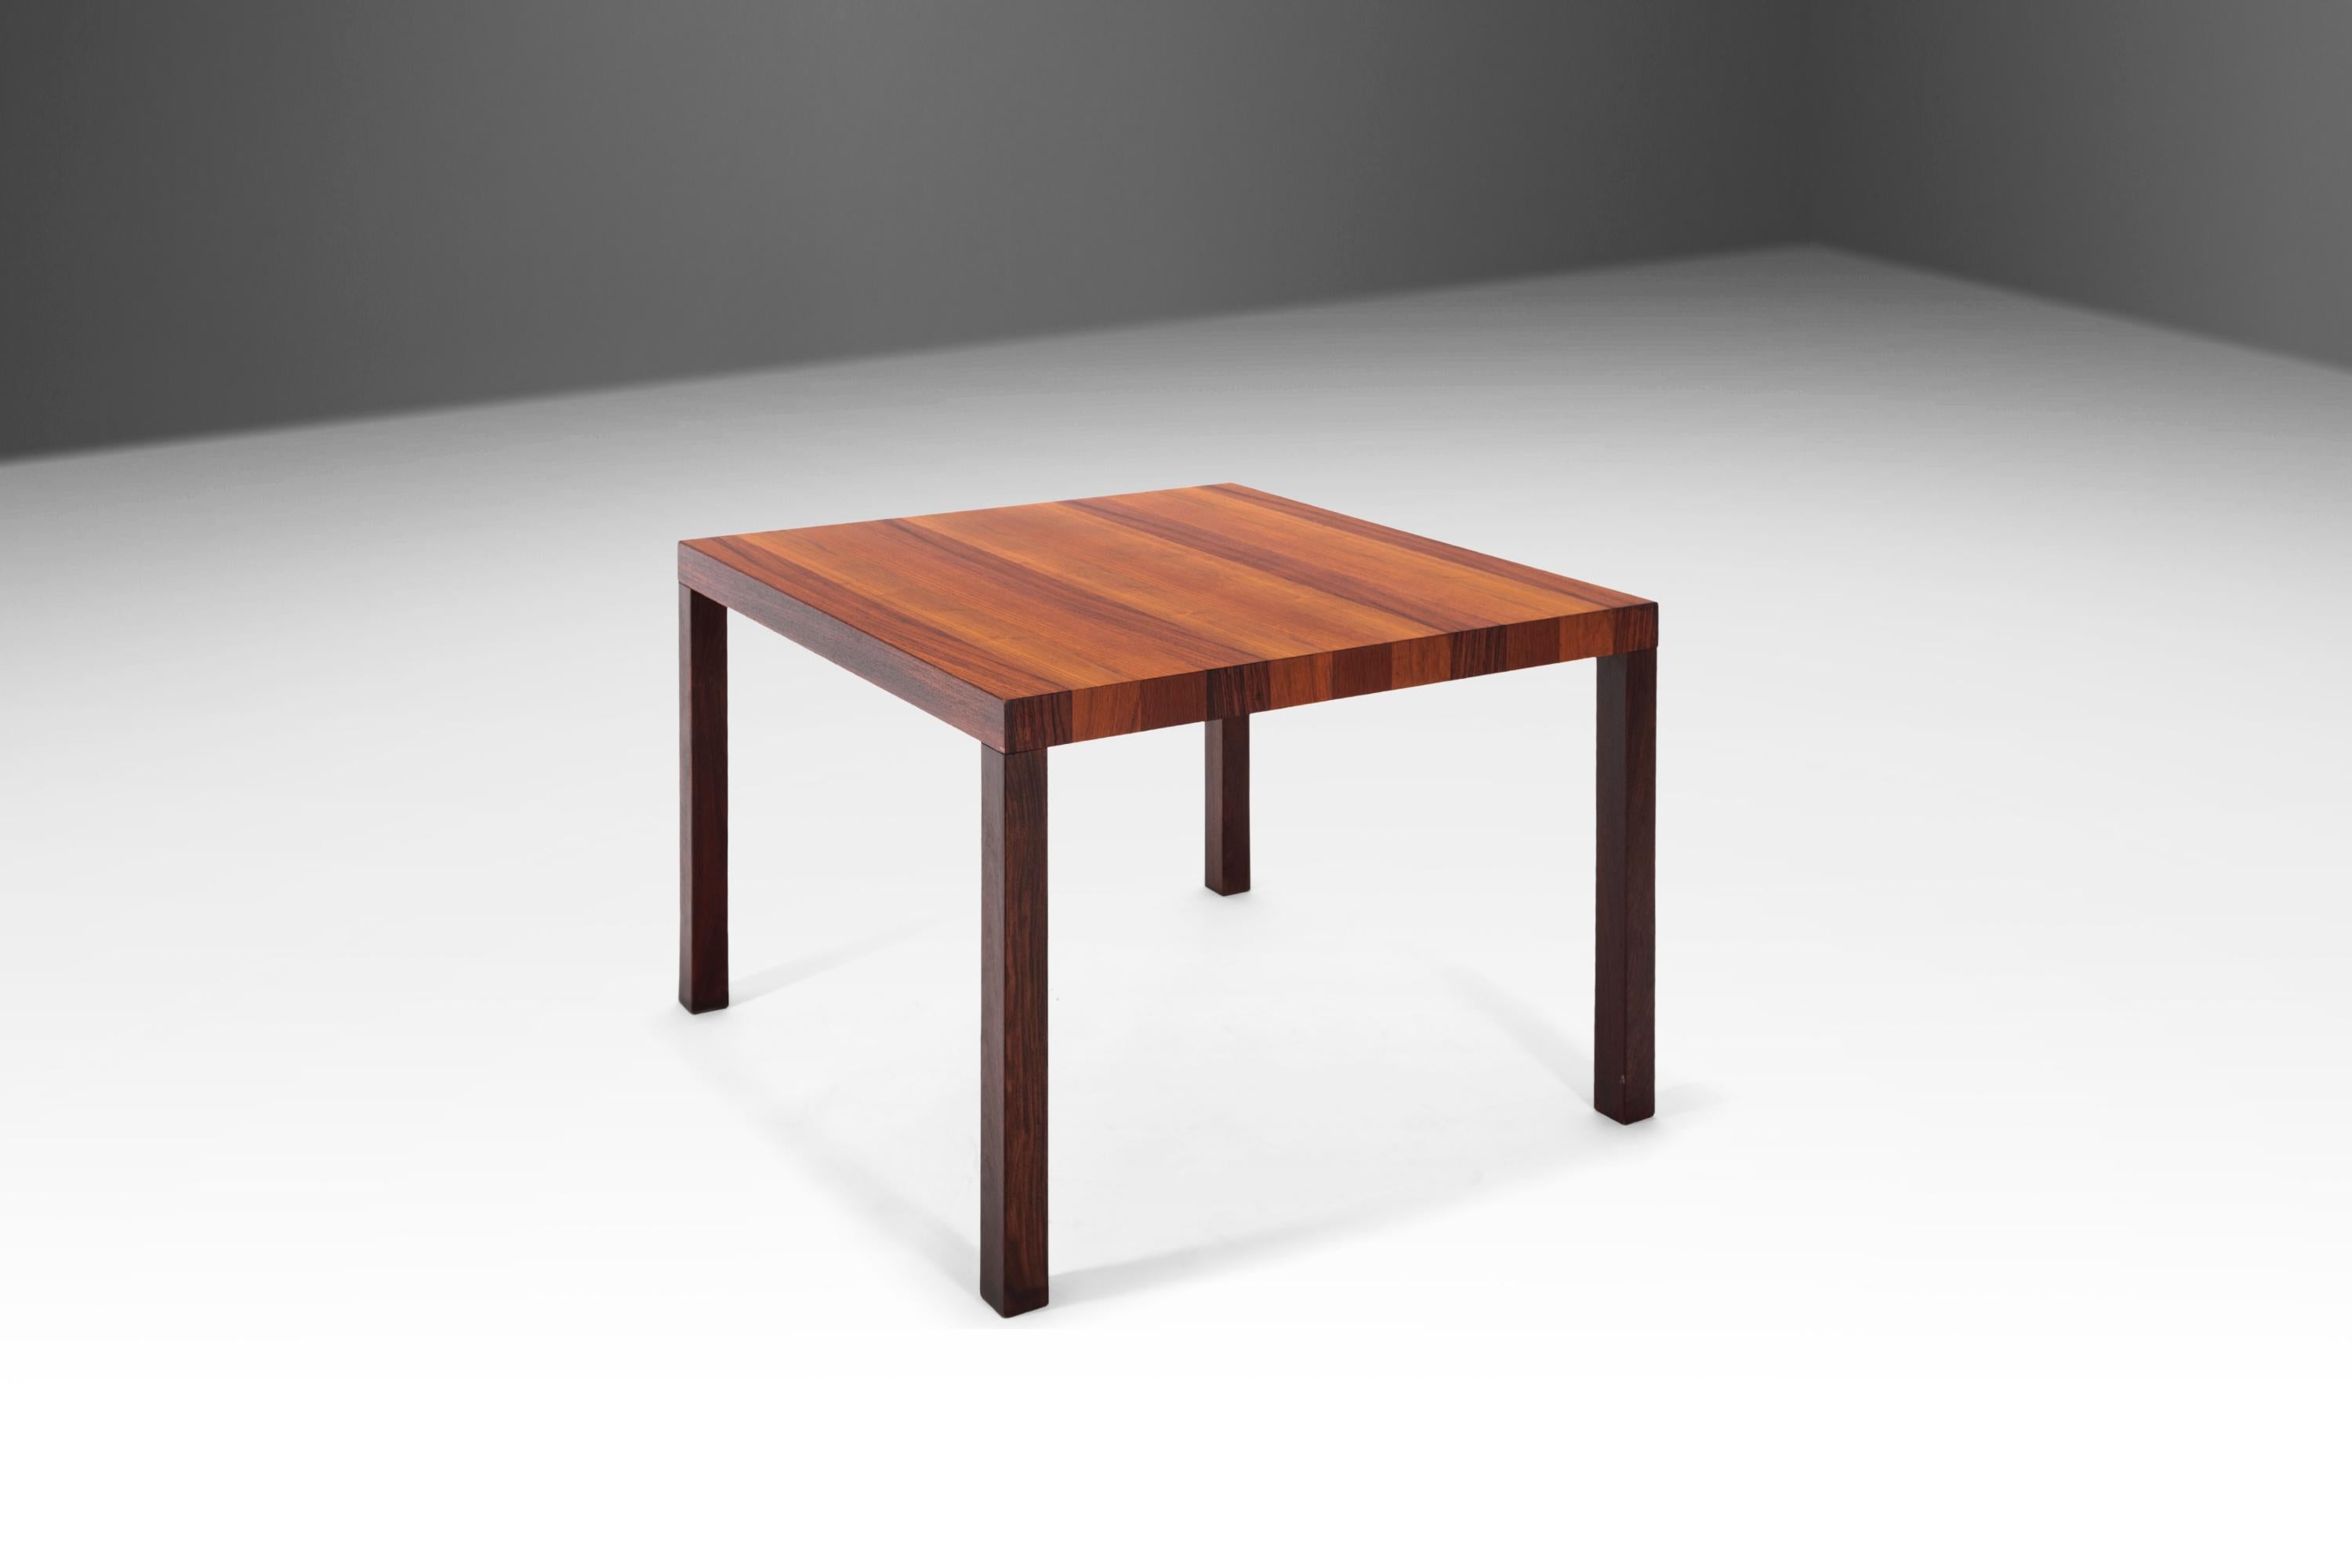 American Parsons Dining Table Attributed to Milo Baughman for Directional, USA, c. 1960's